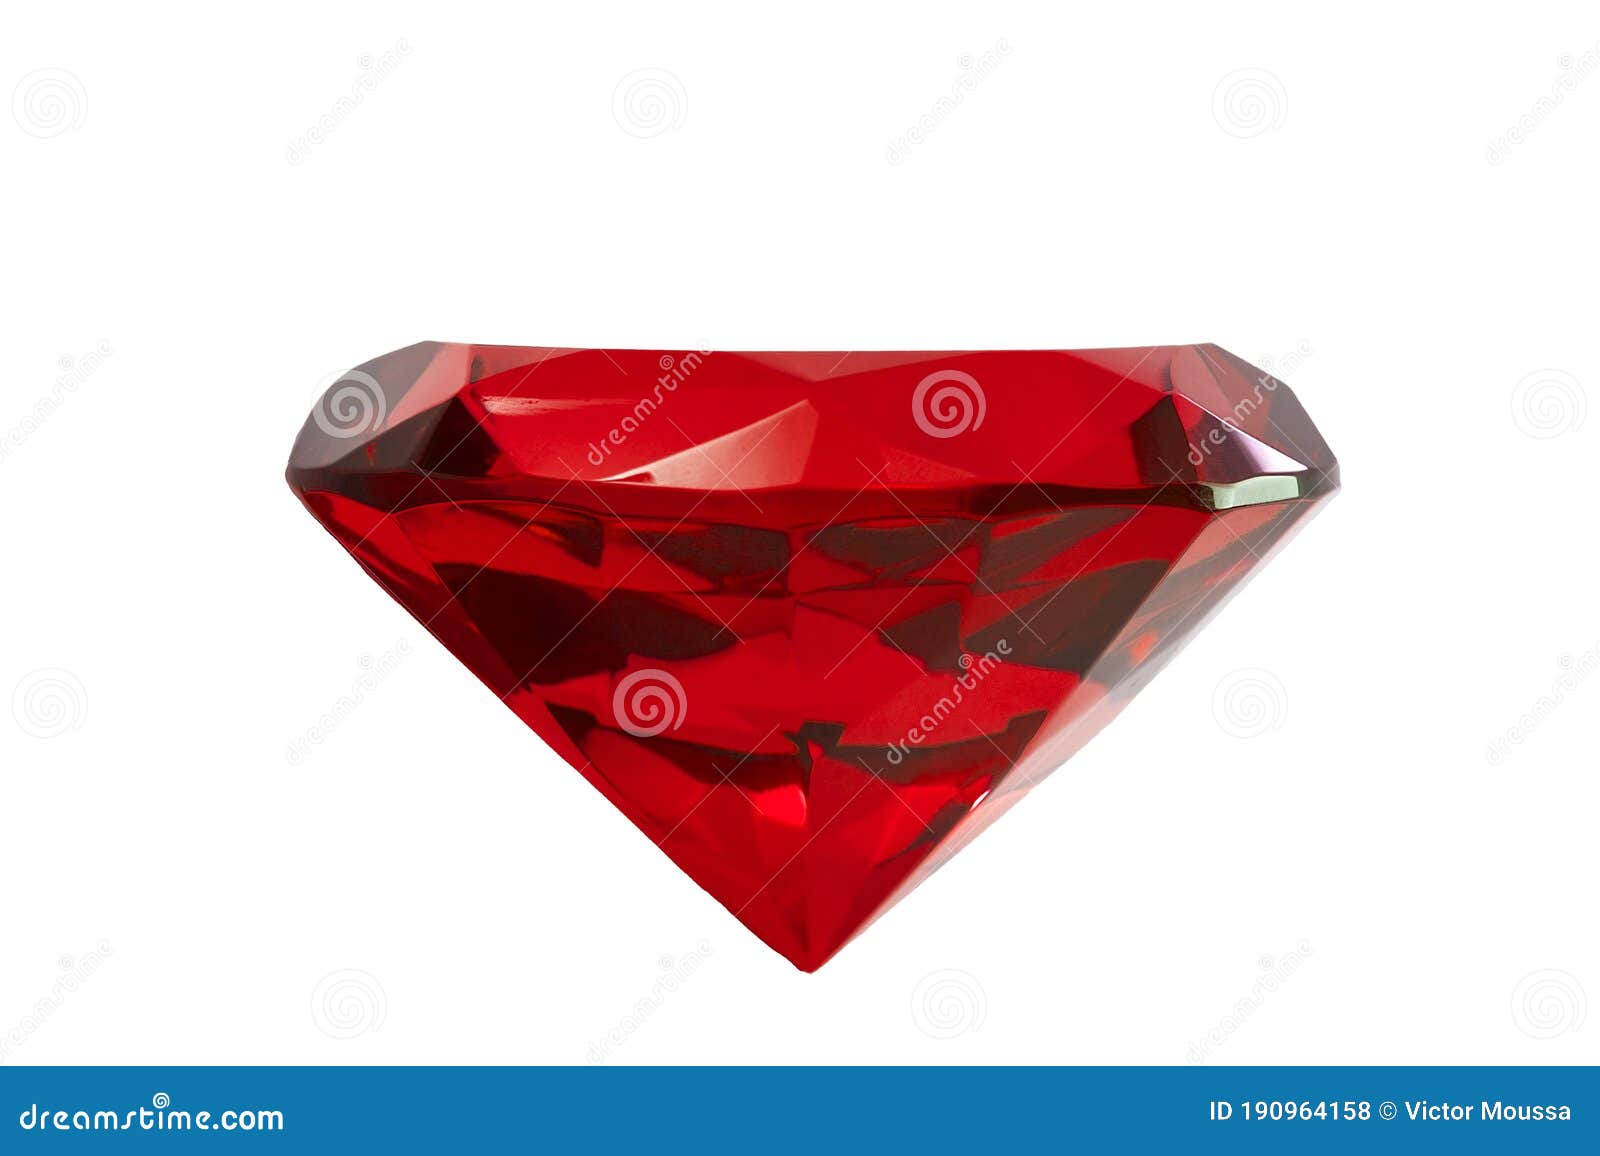 jewelry and gemstones concept with close up on a red ruby gemstone  on a white background with clipping path